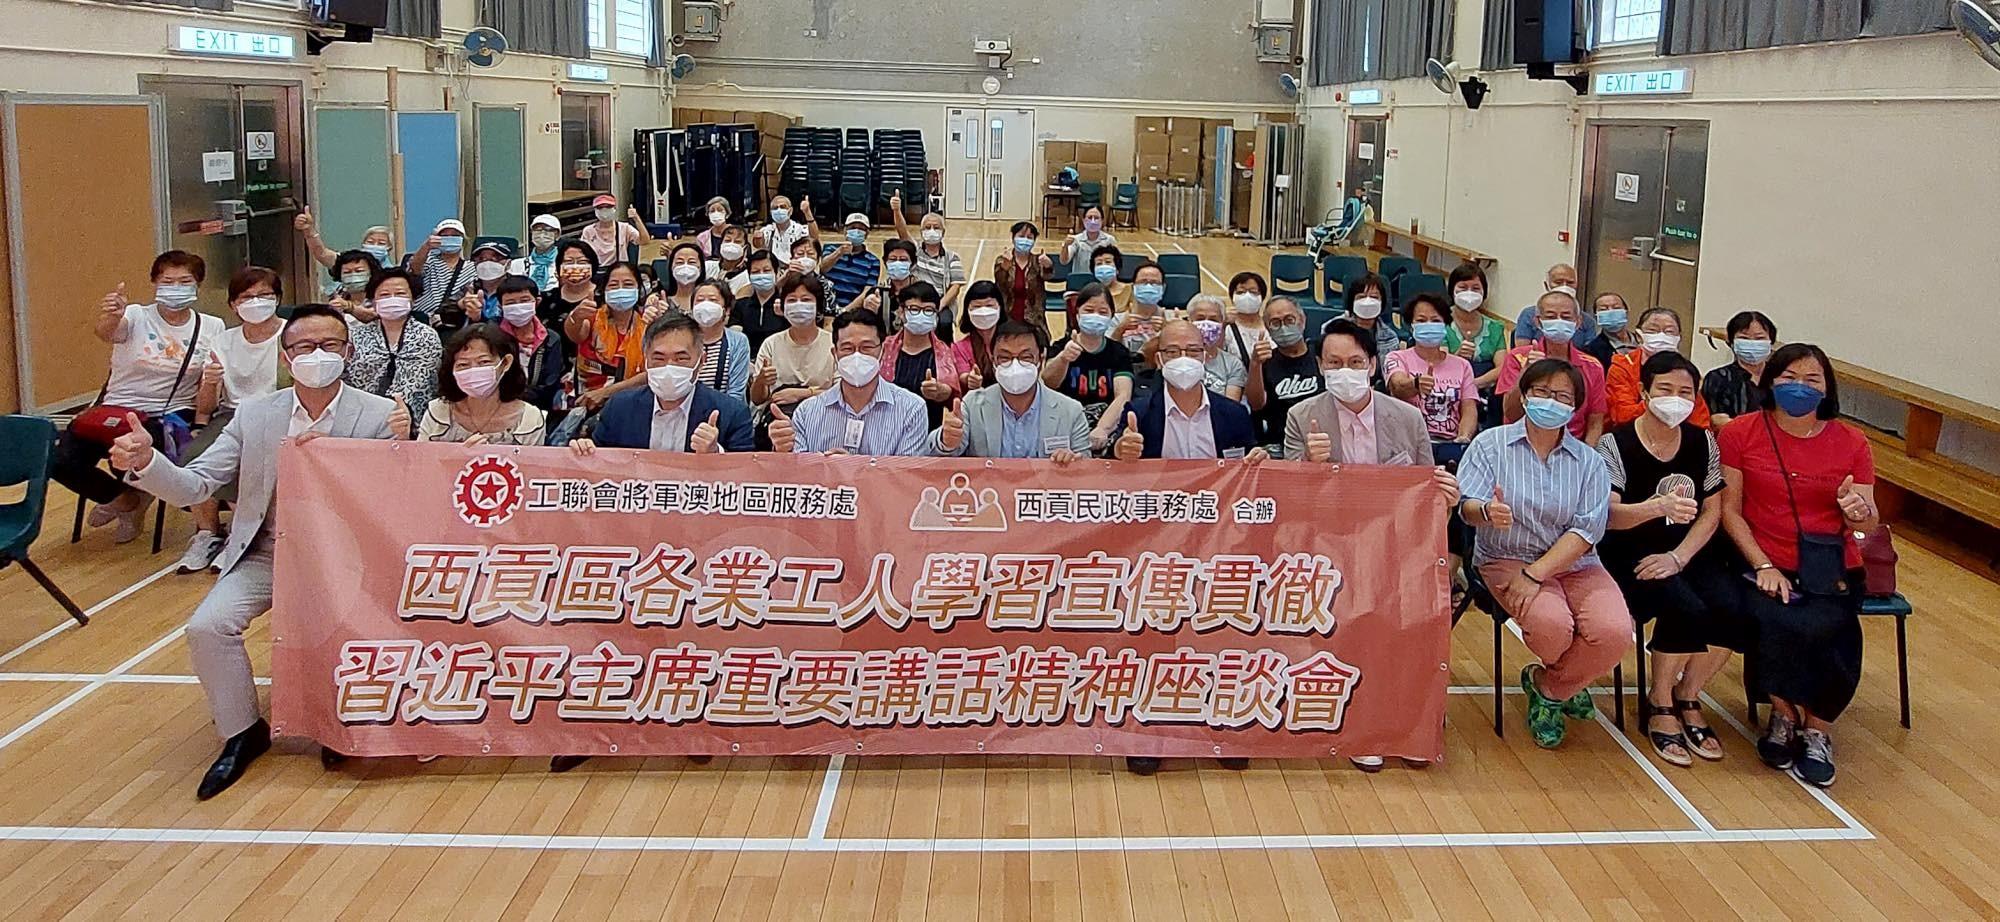 The Sai Kung District Office, in collaboration with the Tseung Kwan O District Service Office of the Hong Kong Federation of Trade Unions, jointly held the "Session to Learn About, Promote and Implement the Spirit of President Xi's Important Speech" at King Lam Neighbourhood Community Centre on July 30. Photo shows guests and participants at the session.